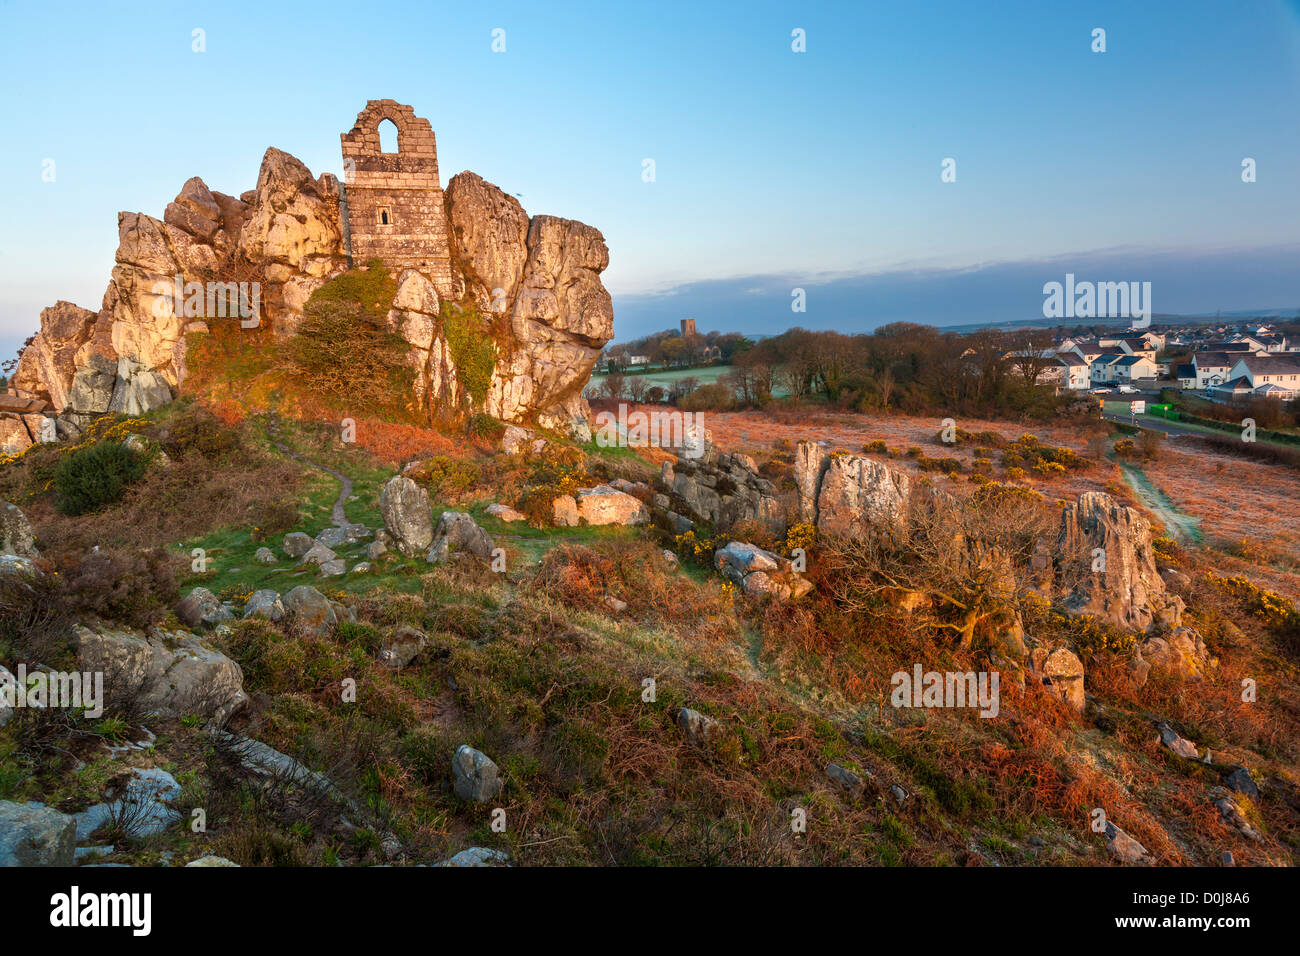 Ruined chapel of St. Michael dating from 1409, Roche rock outcrop. Cornwall, England, United Kingdom, Europe Stock Photo